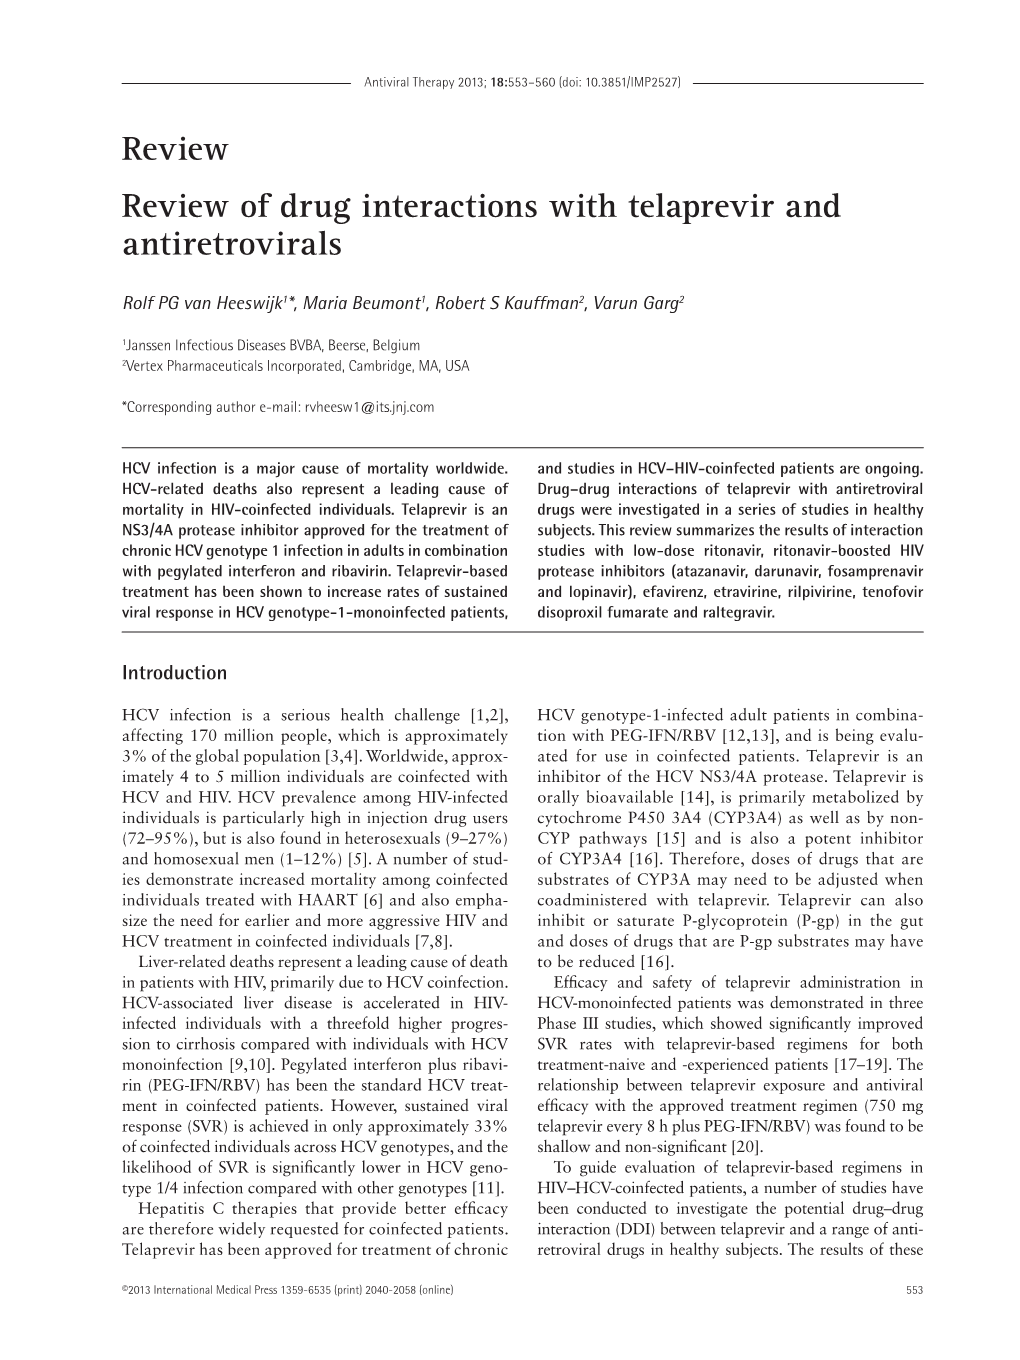 Review Review of Drug Interactions with Telaprevir and Antiretrovirals